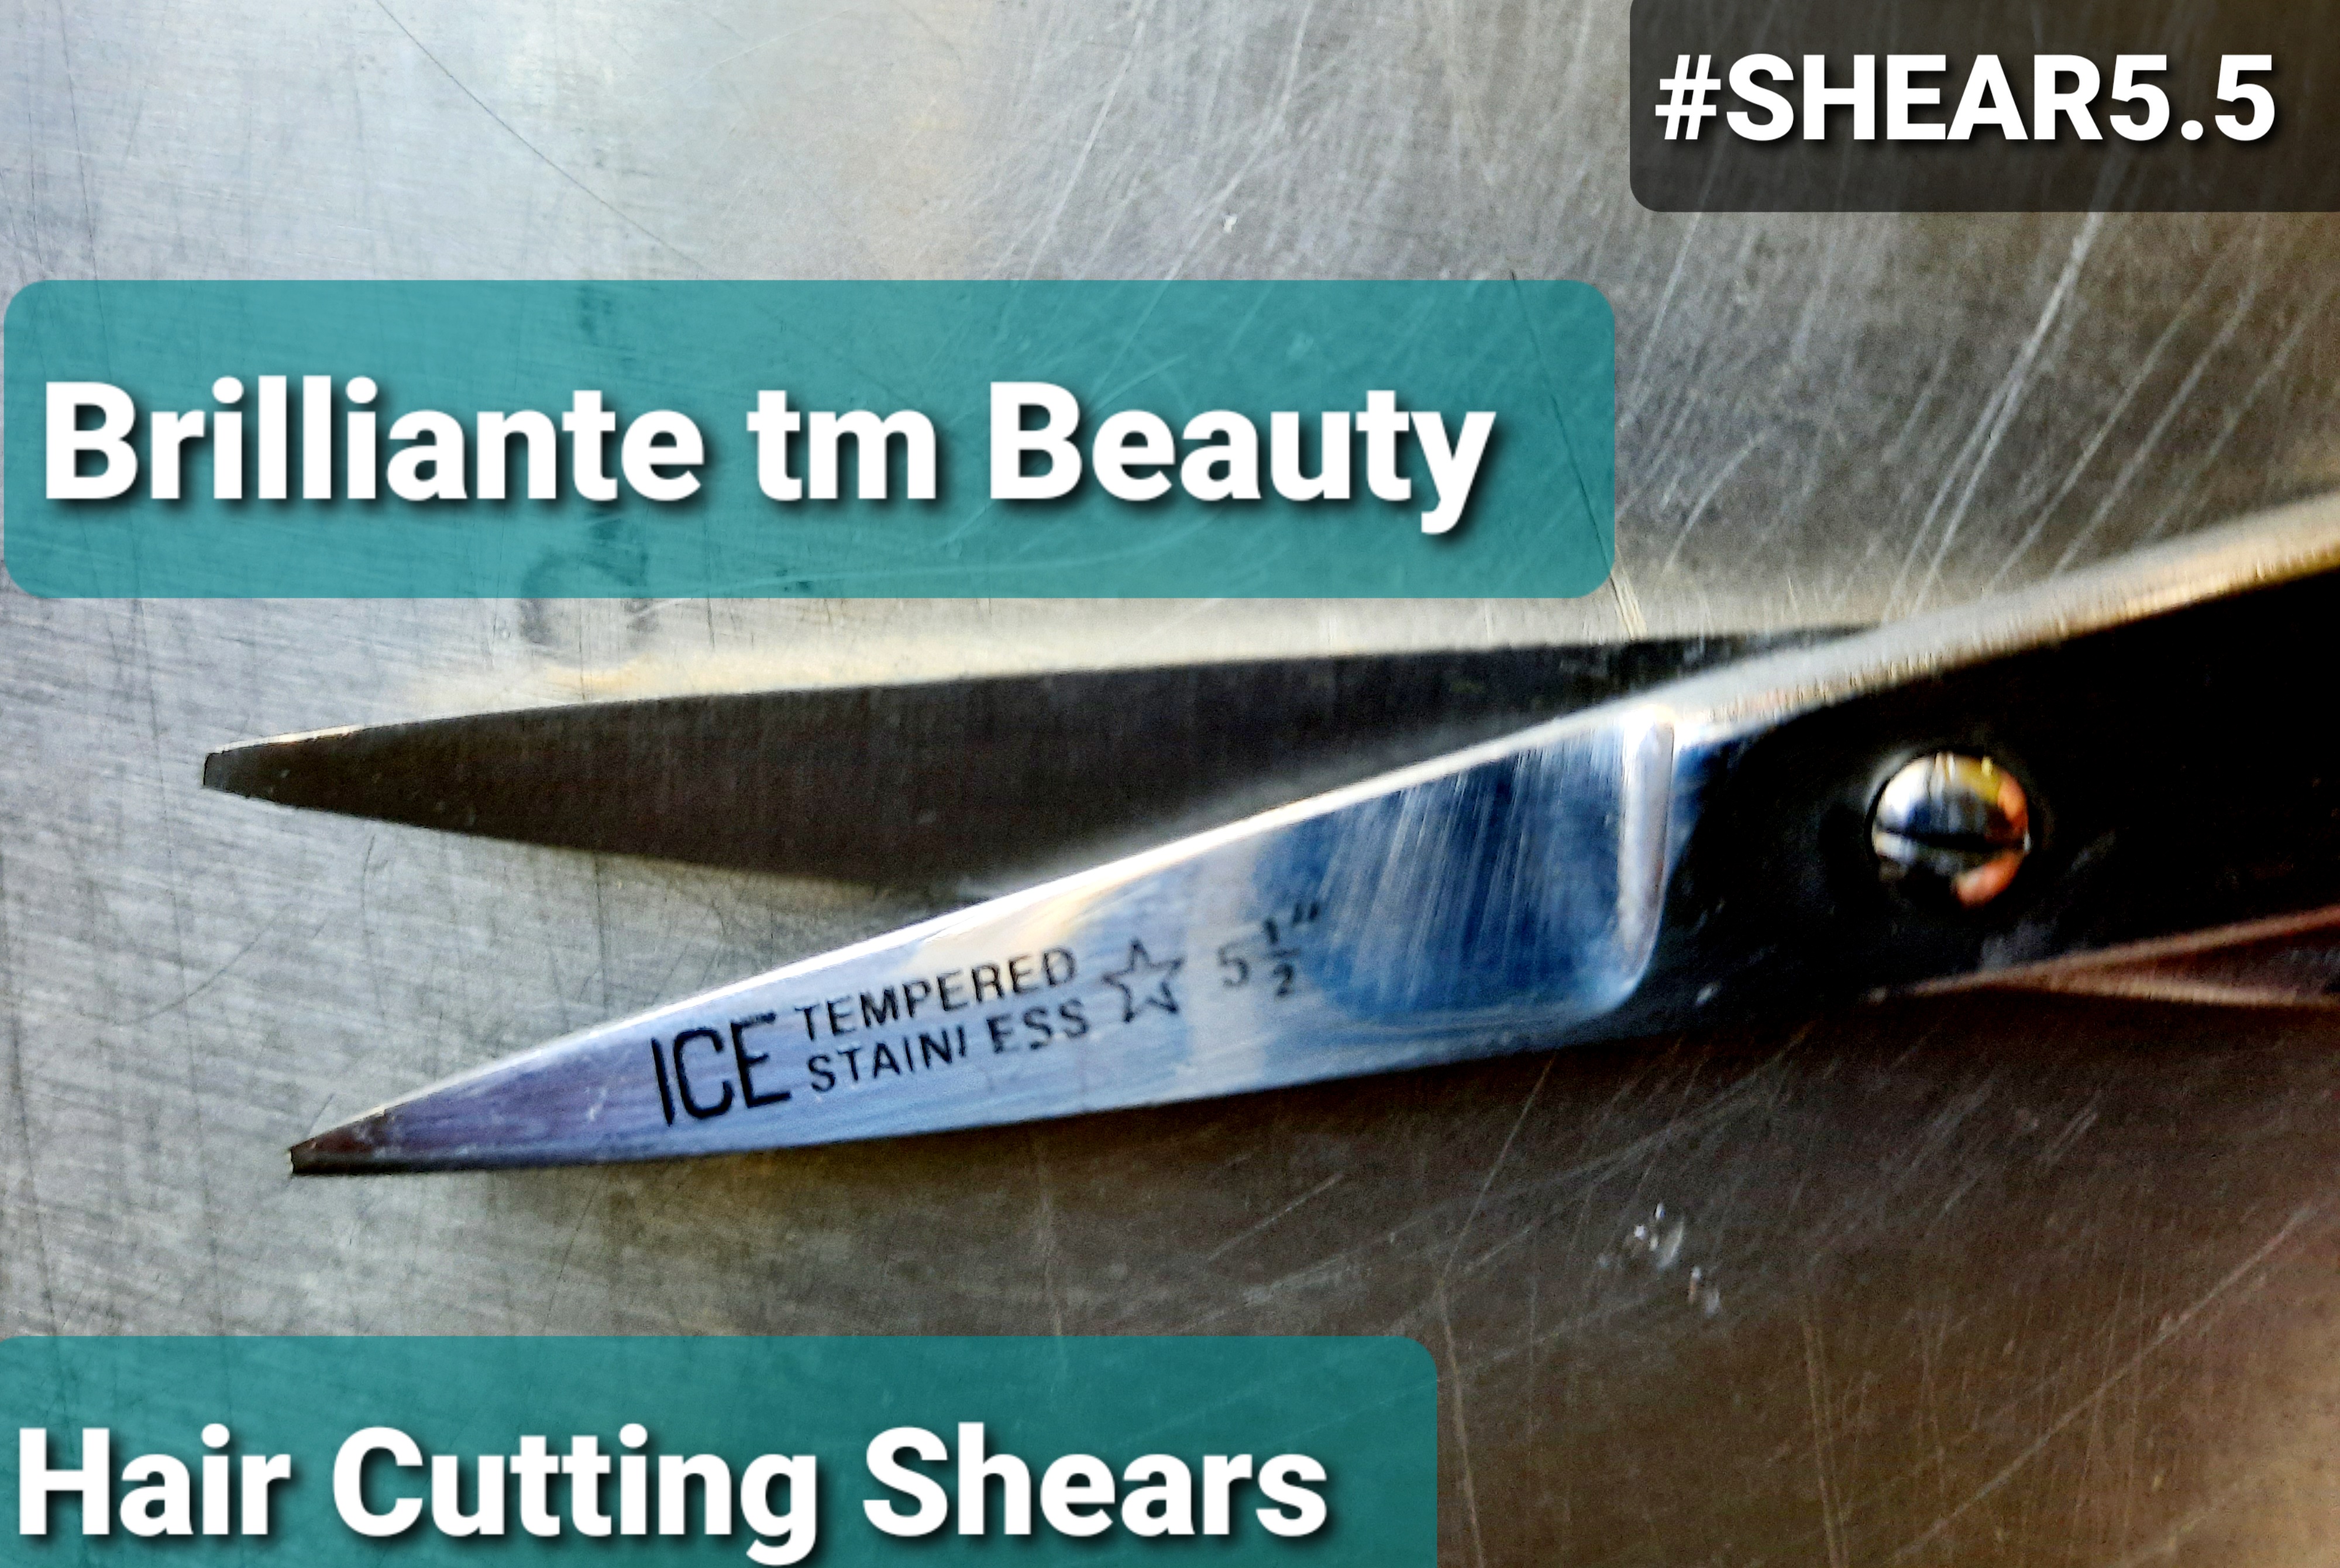 #SHEAR5.5 FROM BRILLIANTE tm BEAUTY AND POLLY PRODUCTS. 5.5.5"L 